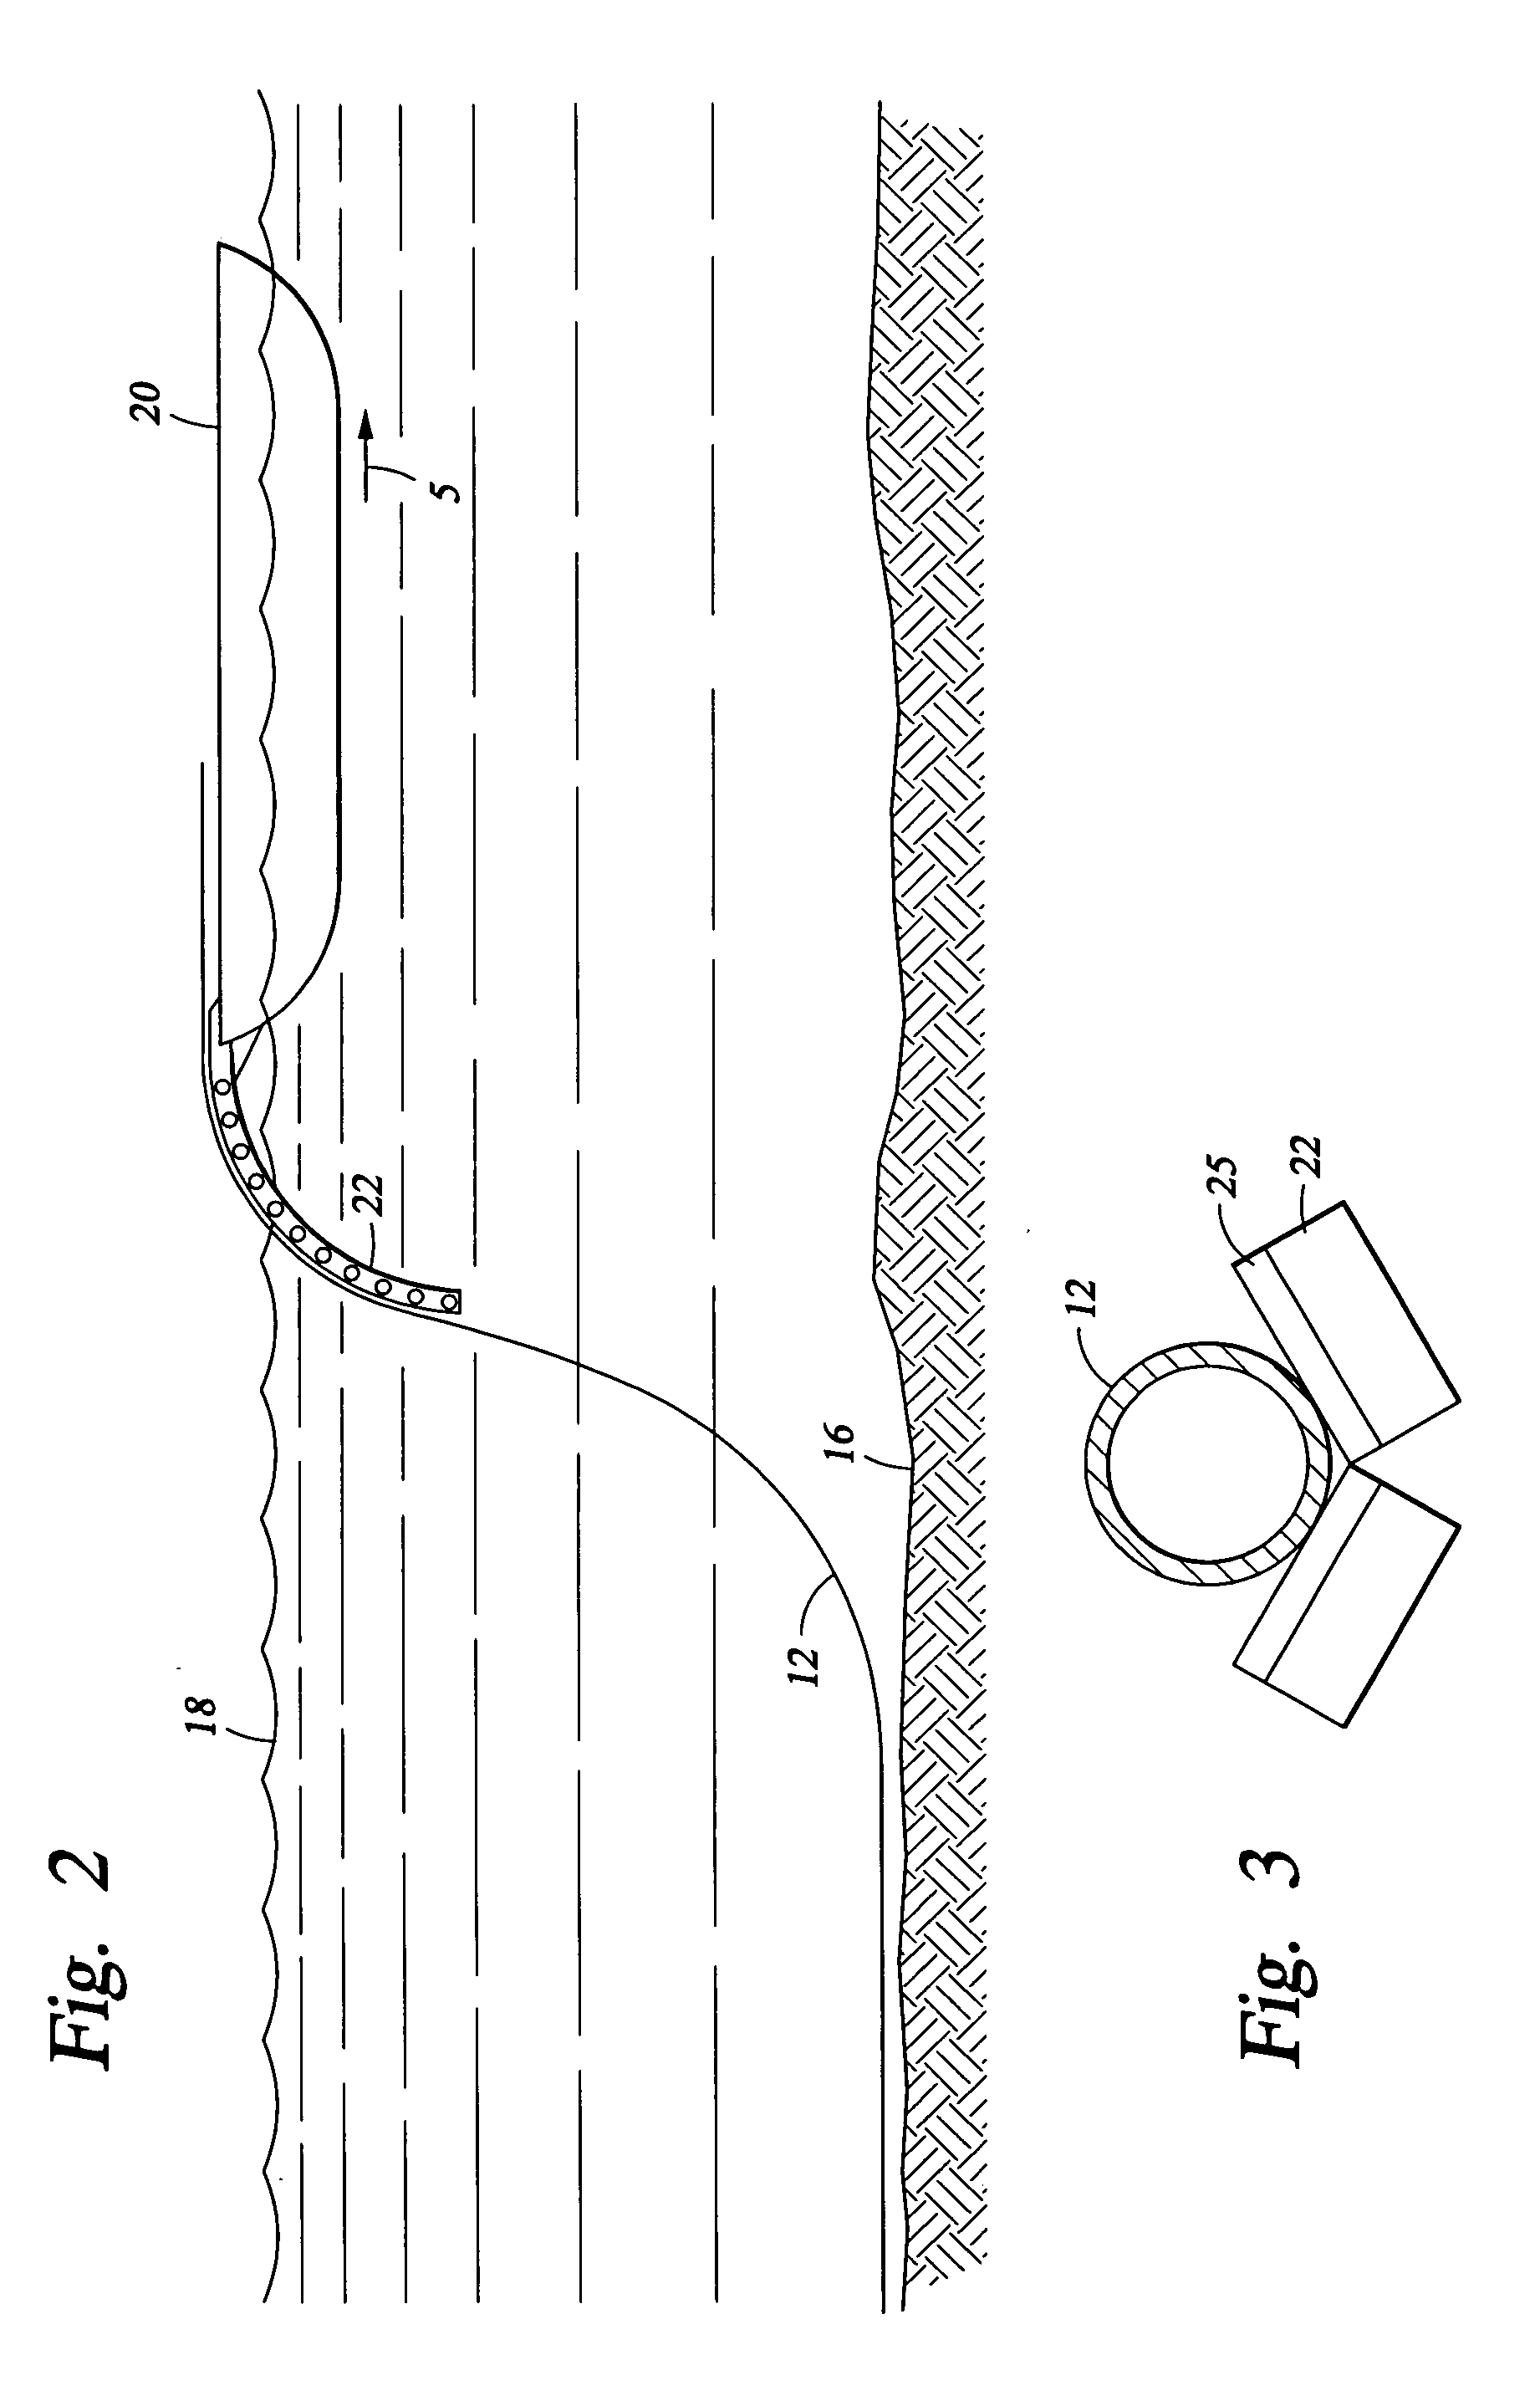 Methods and apparatus for installation of VIV suppression during installation of marine pipeline